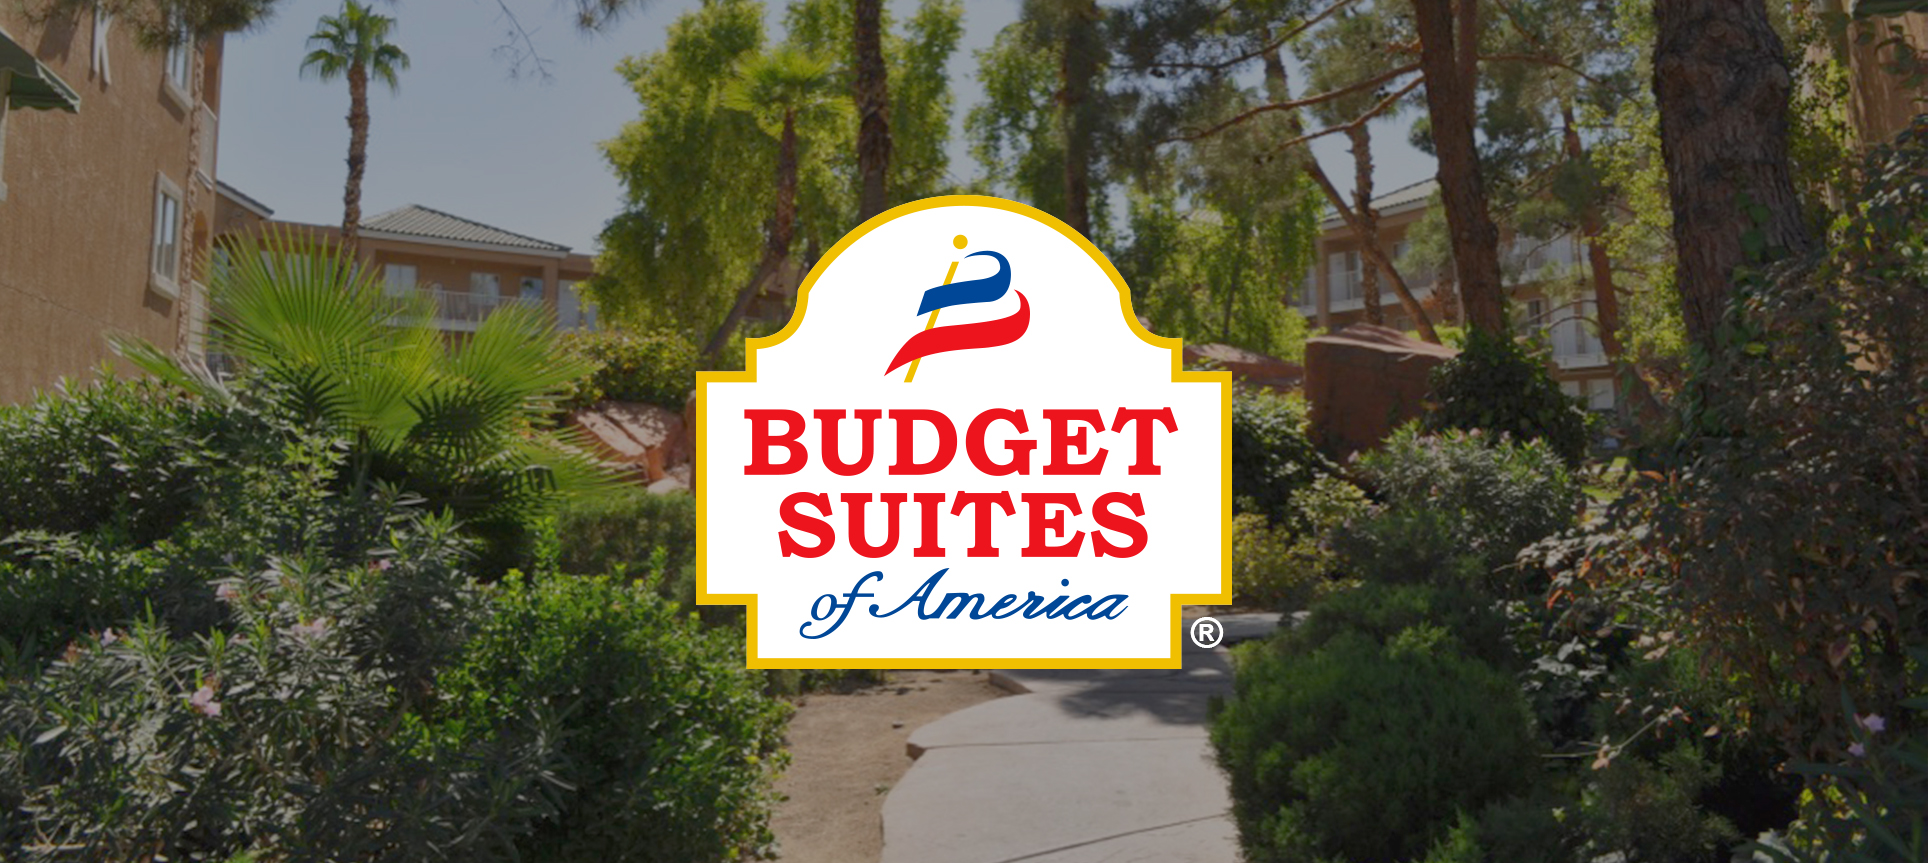 budget suits on boulder and flamingo phone number